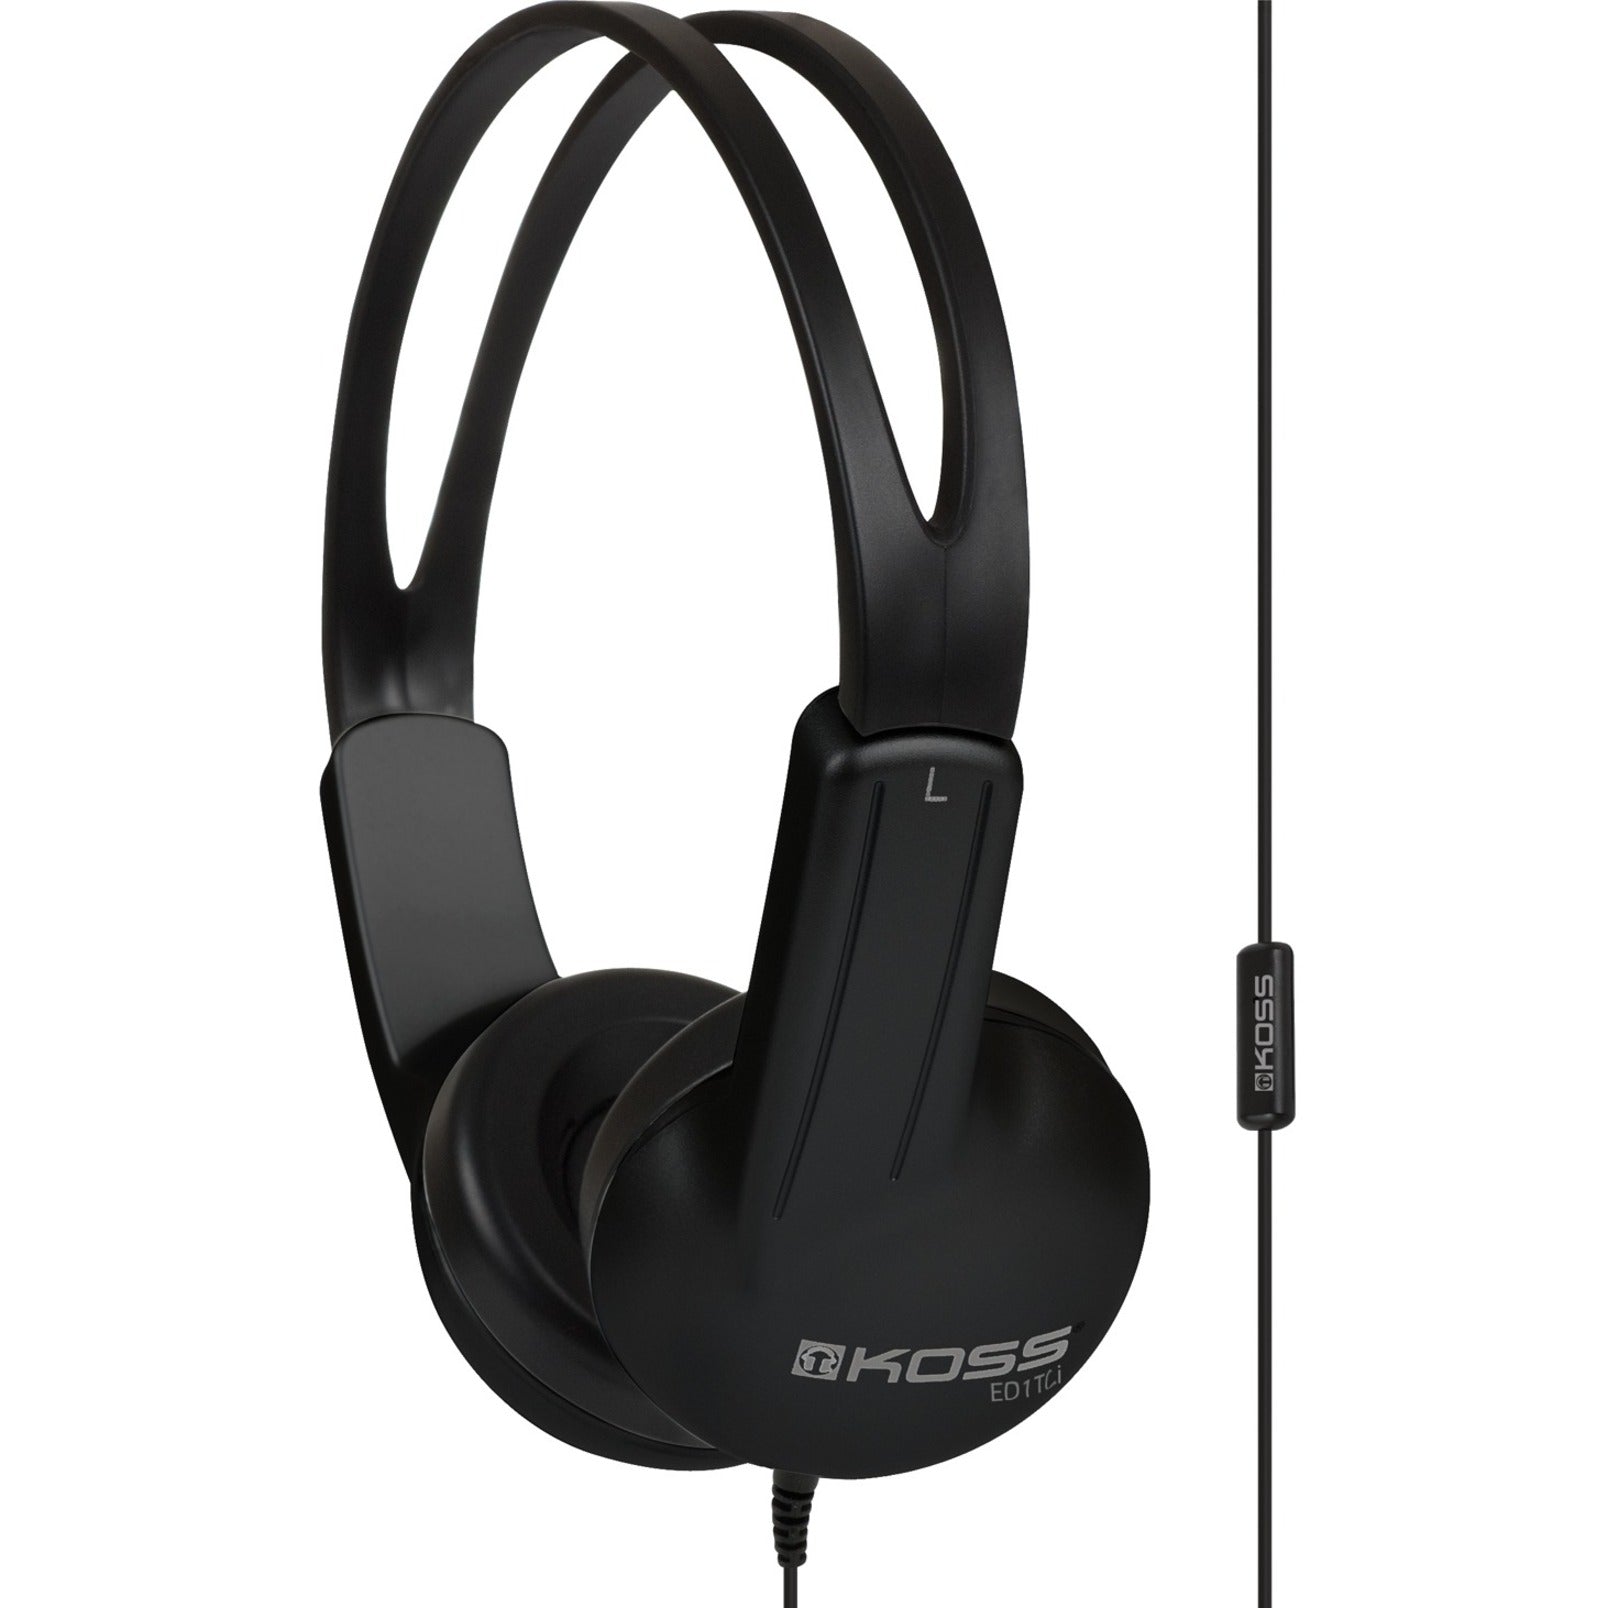 Koss ED1TCI Headsets - Binaural Over-the-head Headset with On-cable Mic, Lifetime Warranty